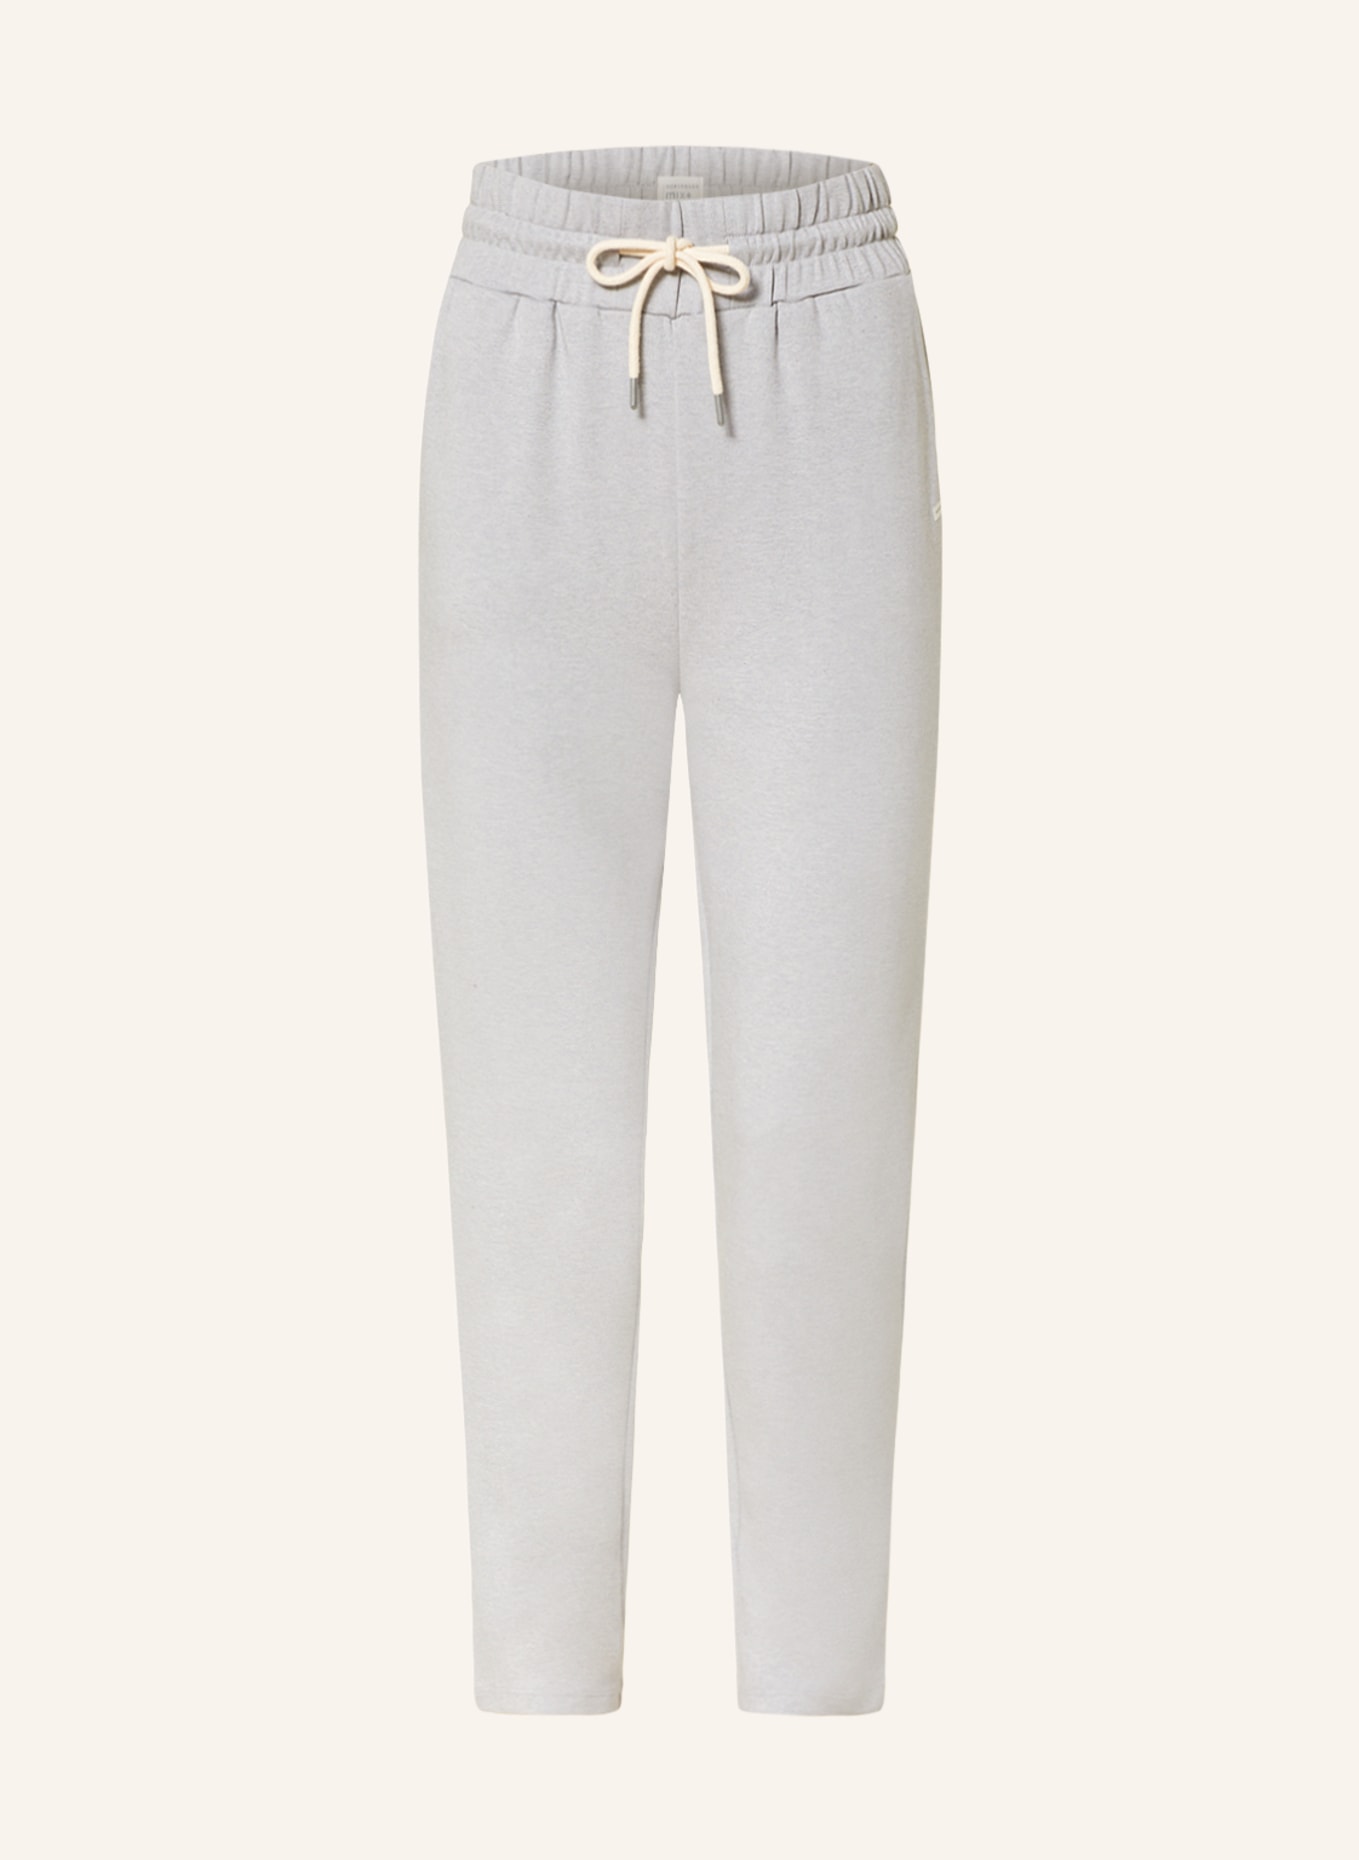 SCHIESSER Lounge pants MIX+RELAX, Color: LIGHT GRAY (Image 1)